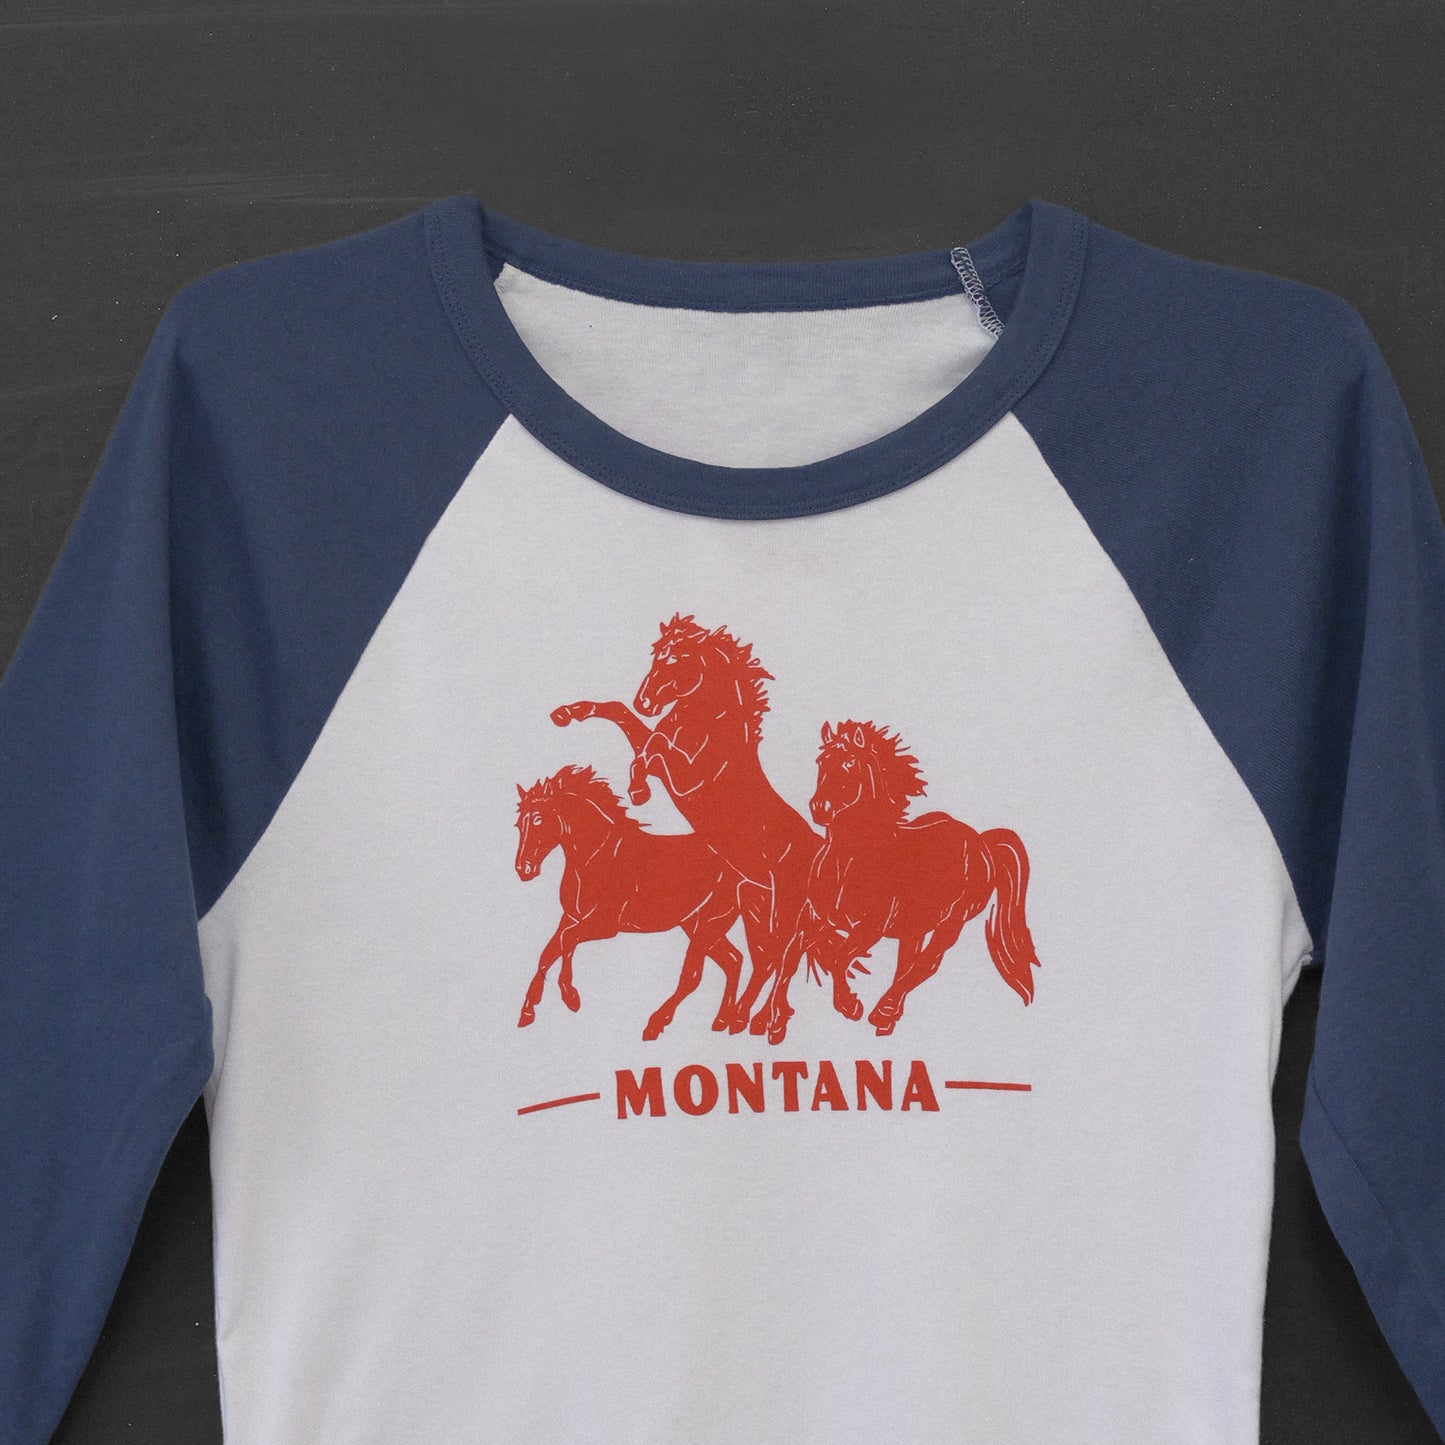 Horsepower Montana Navy Baseball Crop Tee - Intrigue Ink Visit Bozeman, Unique Shopping Boutique in Montana, Work from Home Clothes for Women